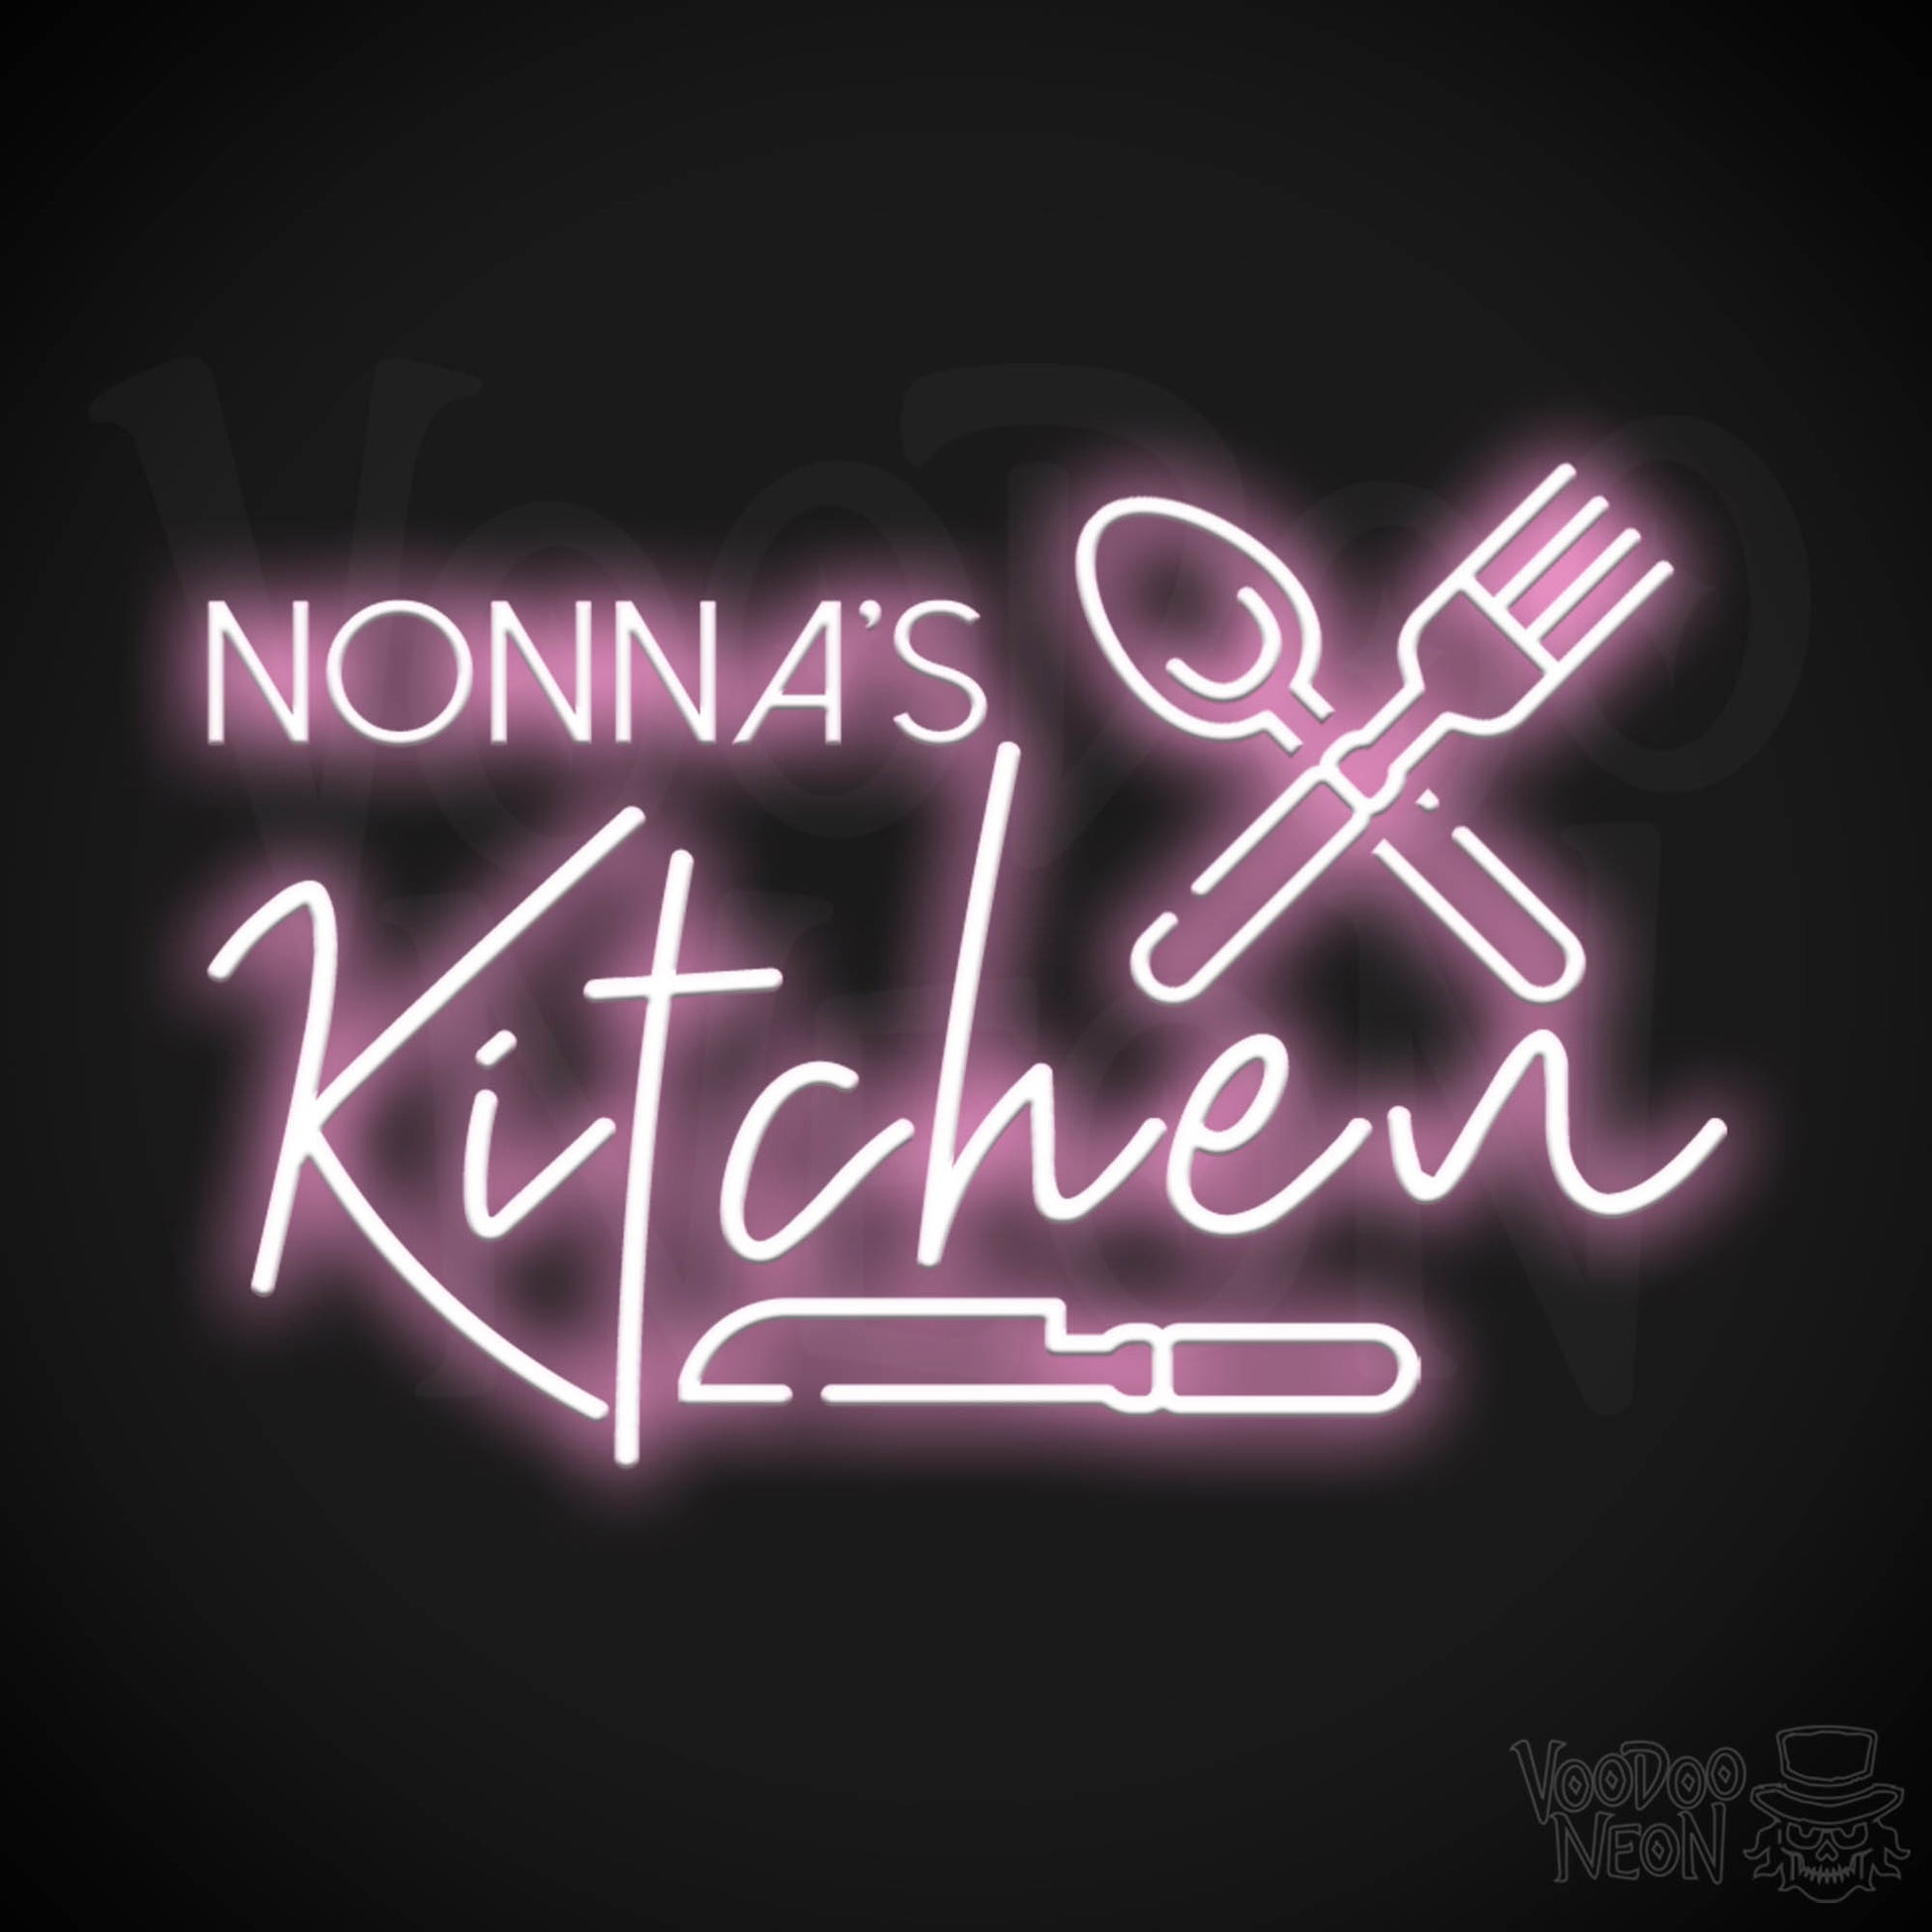 Nonna's Kitchen Neon Sign - Neon Nona's Kitchen Sign - Wall Art - Color Light Pink